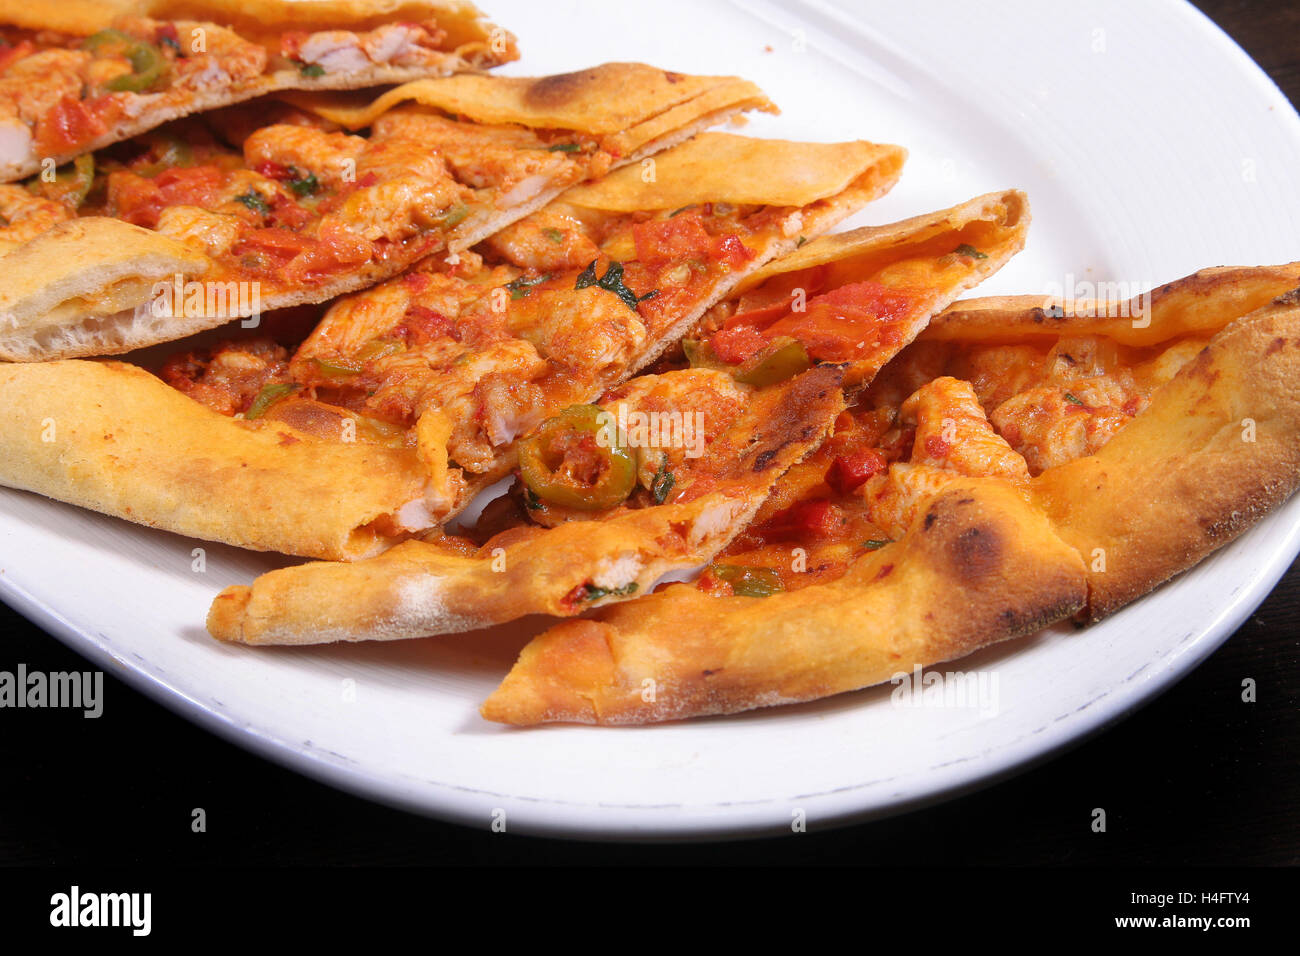 Turkish pizza (pide) with chicken cubes Stock Photo